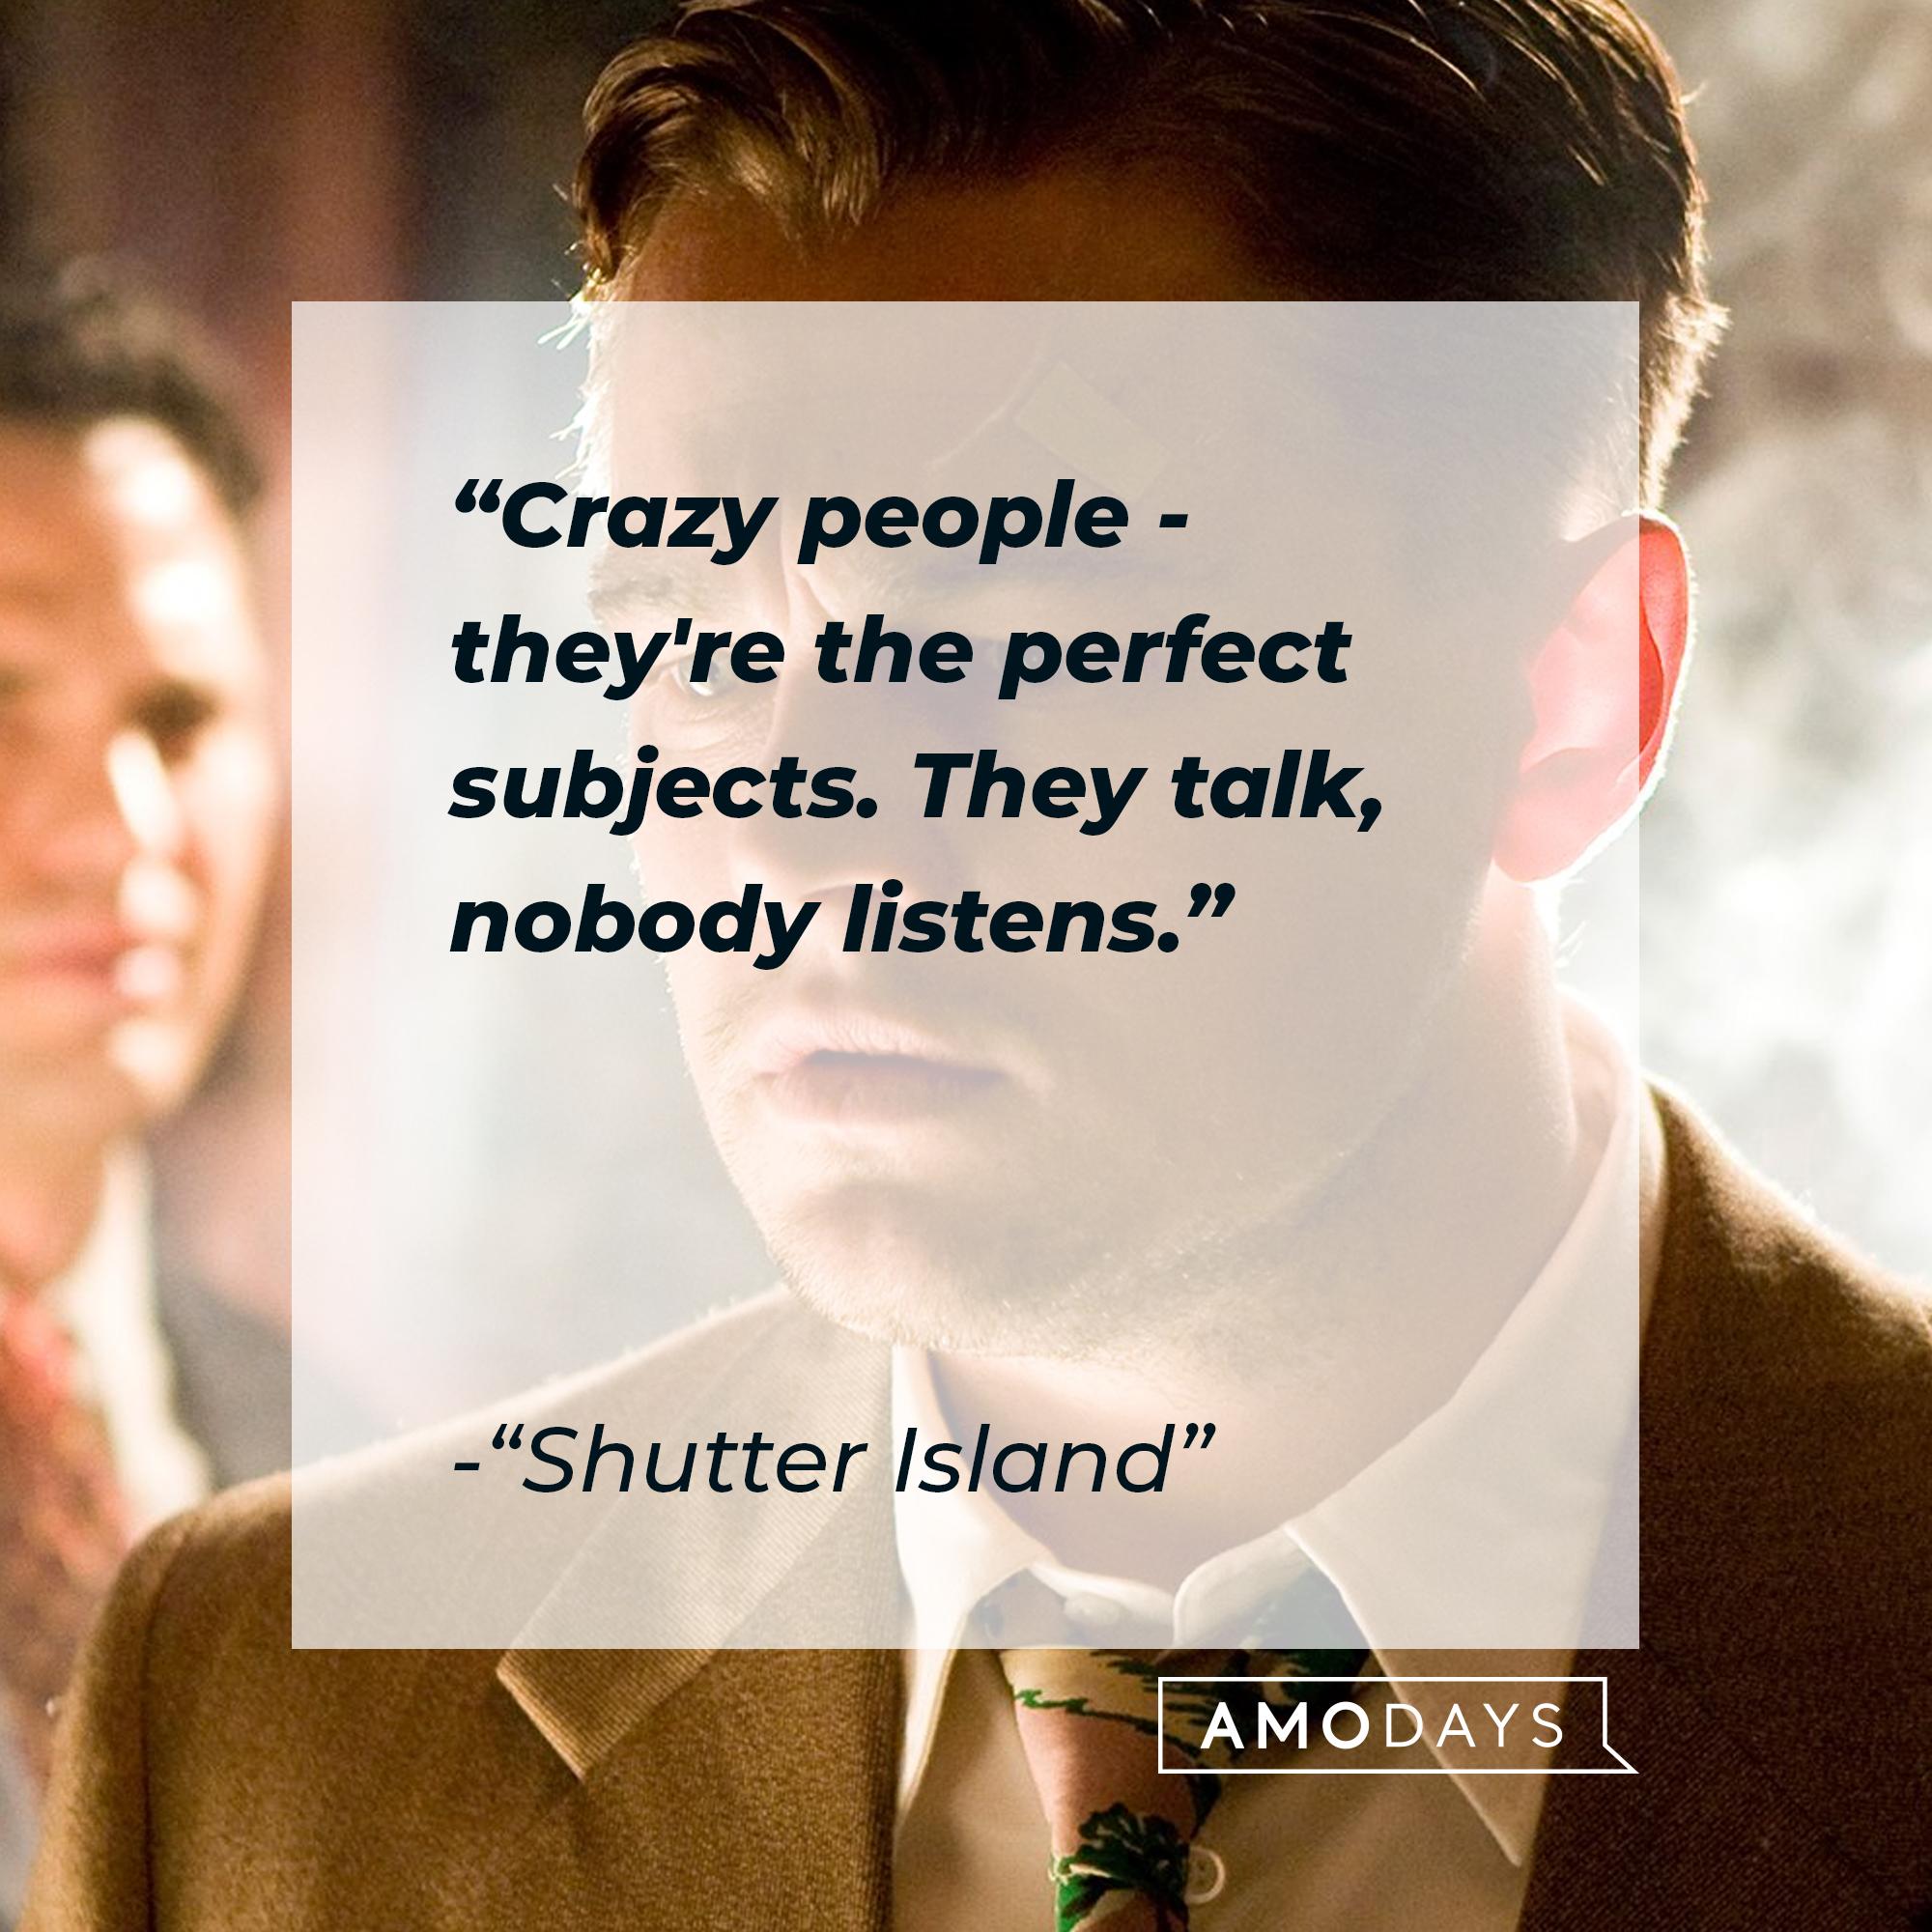 "Shutter Island" quote: "Crazy people - they're the perfect subjects. They talk, nobody listens." | Source: facebook.com/ShutterIsland